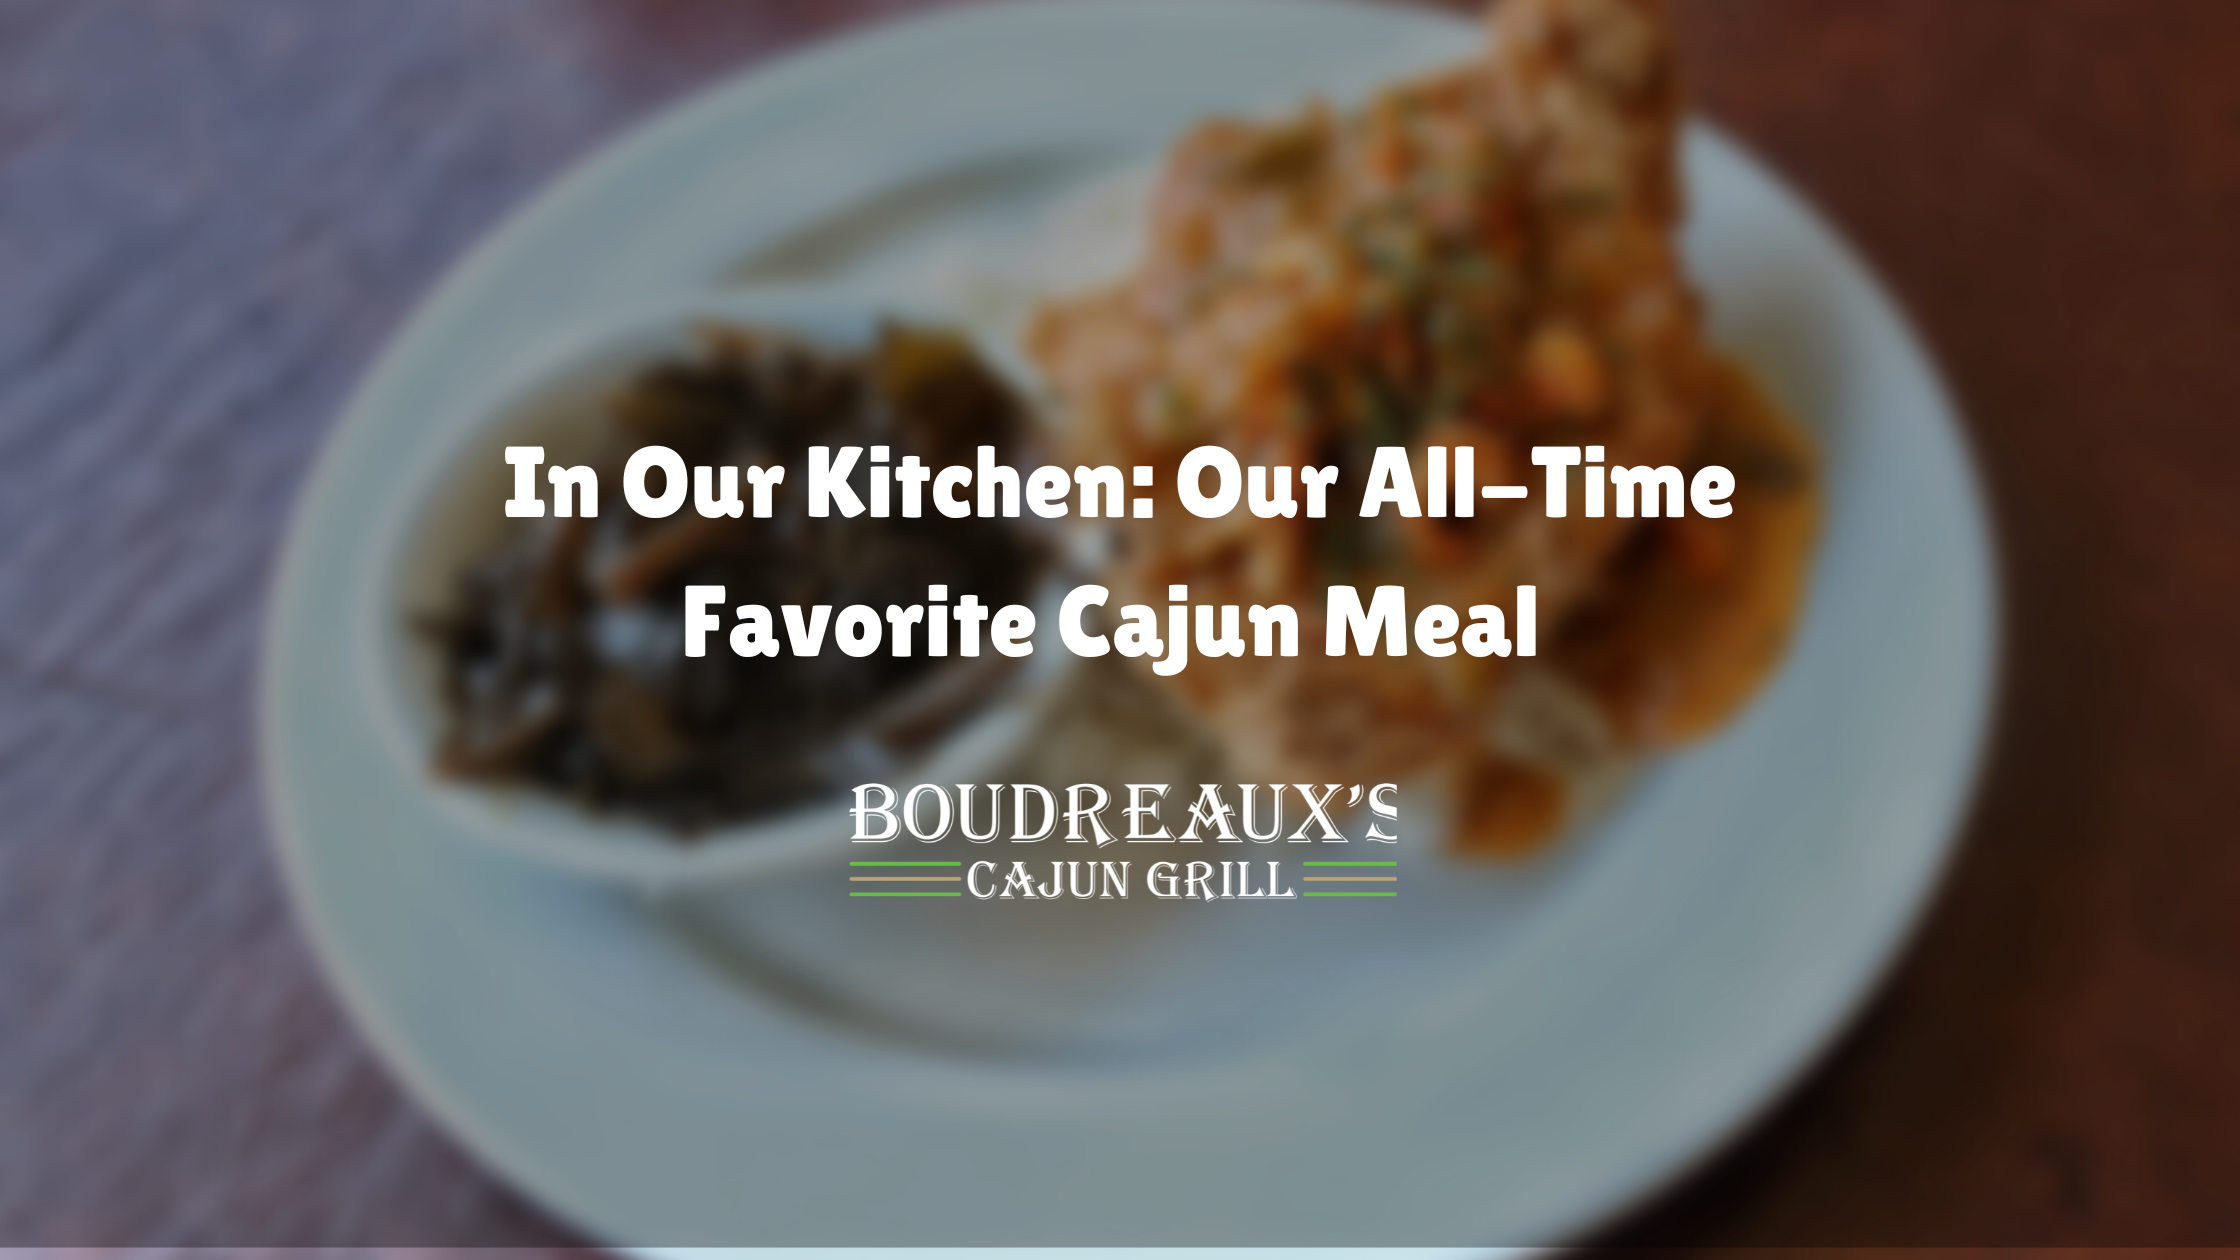 Our All-Time Favorite Cajun Meal at Boudreaux's